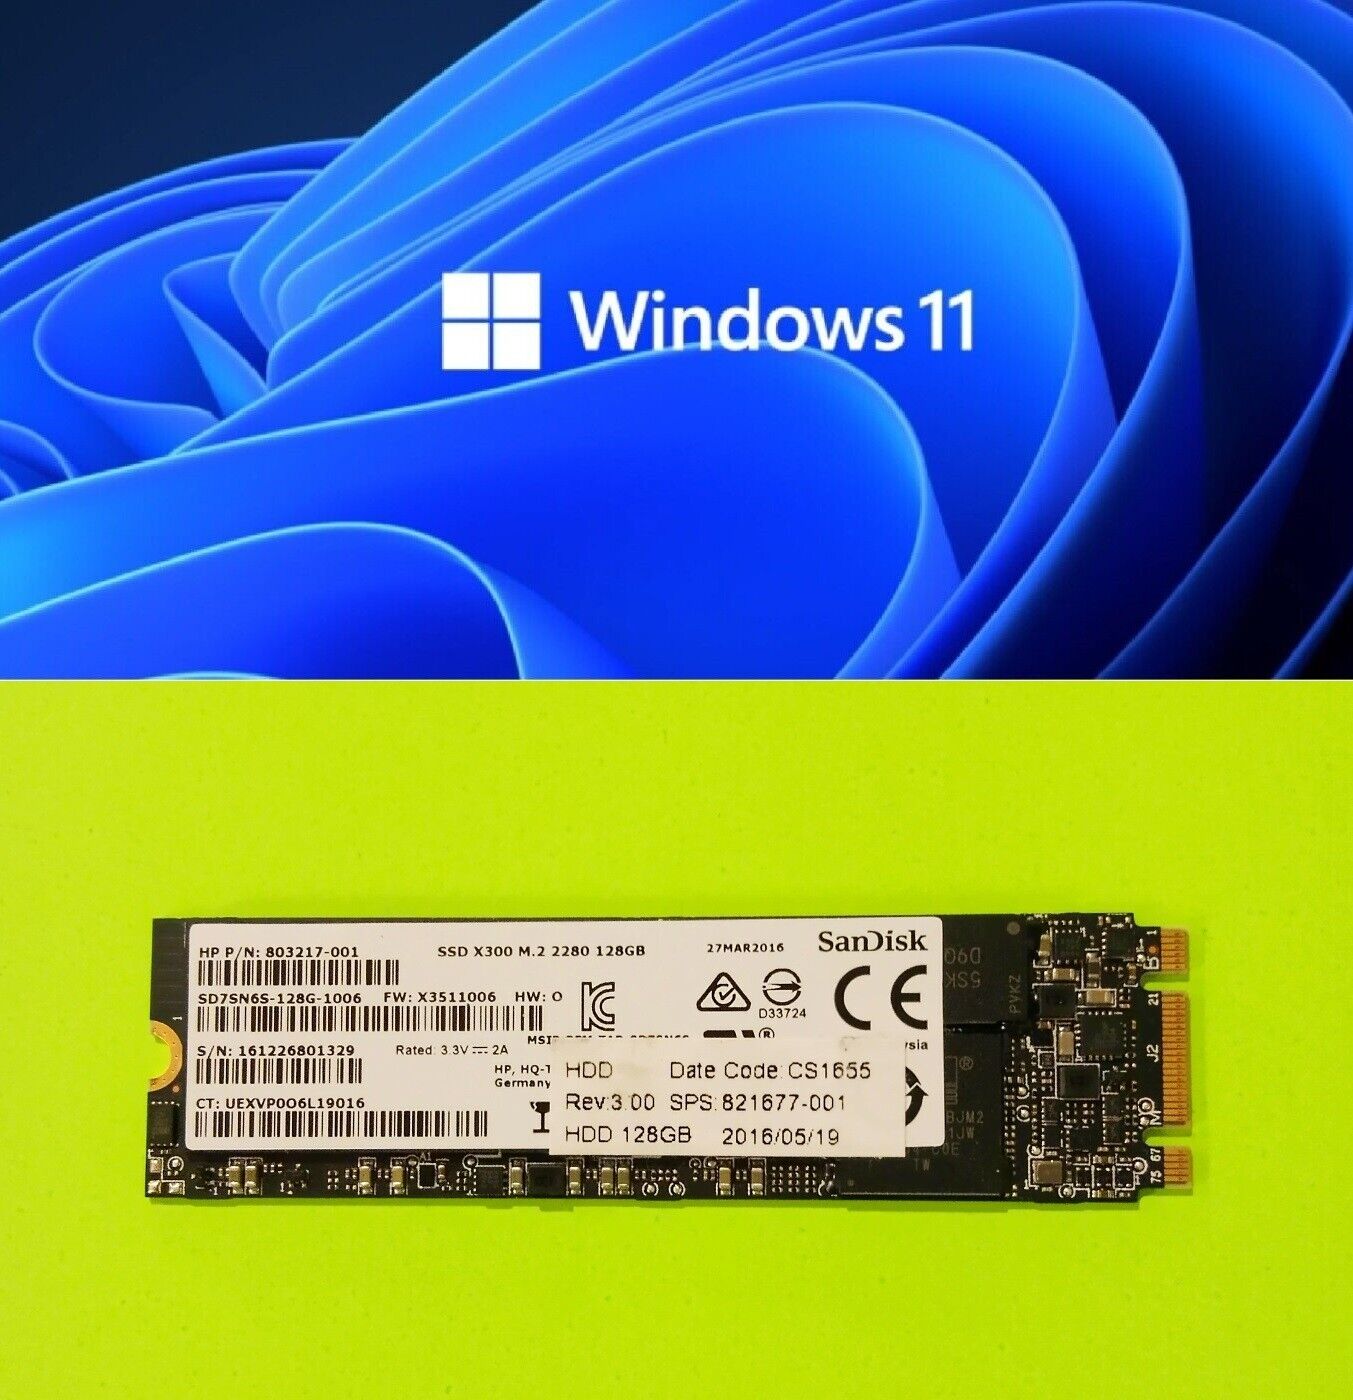 128GB 128 GB M.2 2280 SSD Solid State Drive with Windows 11 Pro UEFI [ACTIVATED]